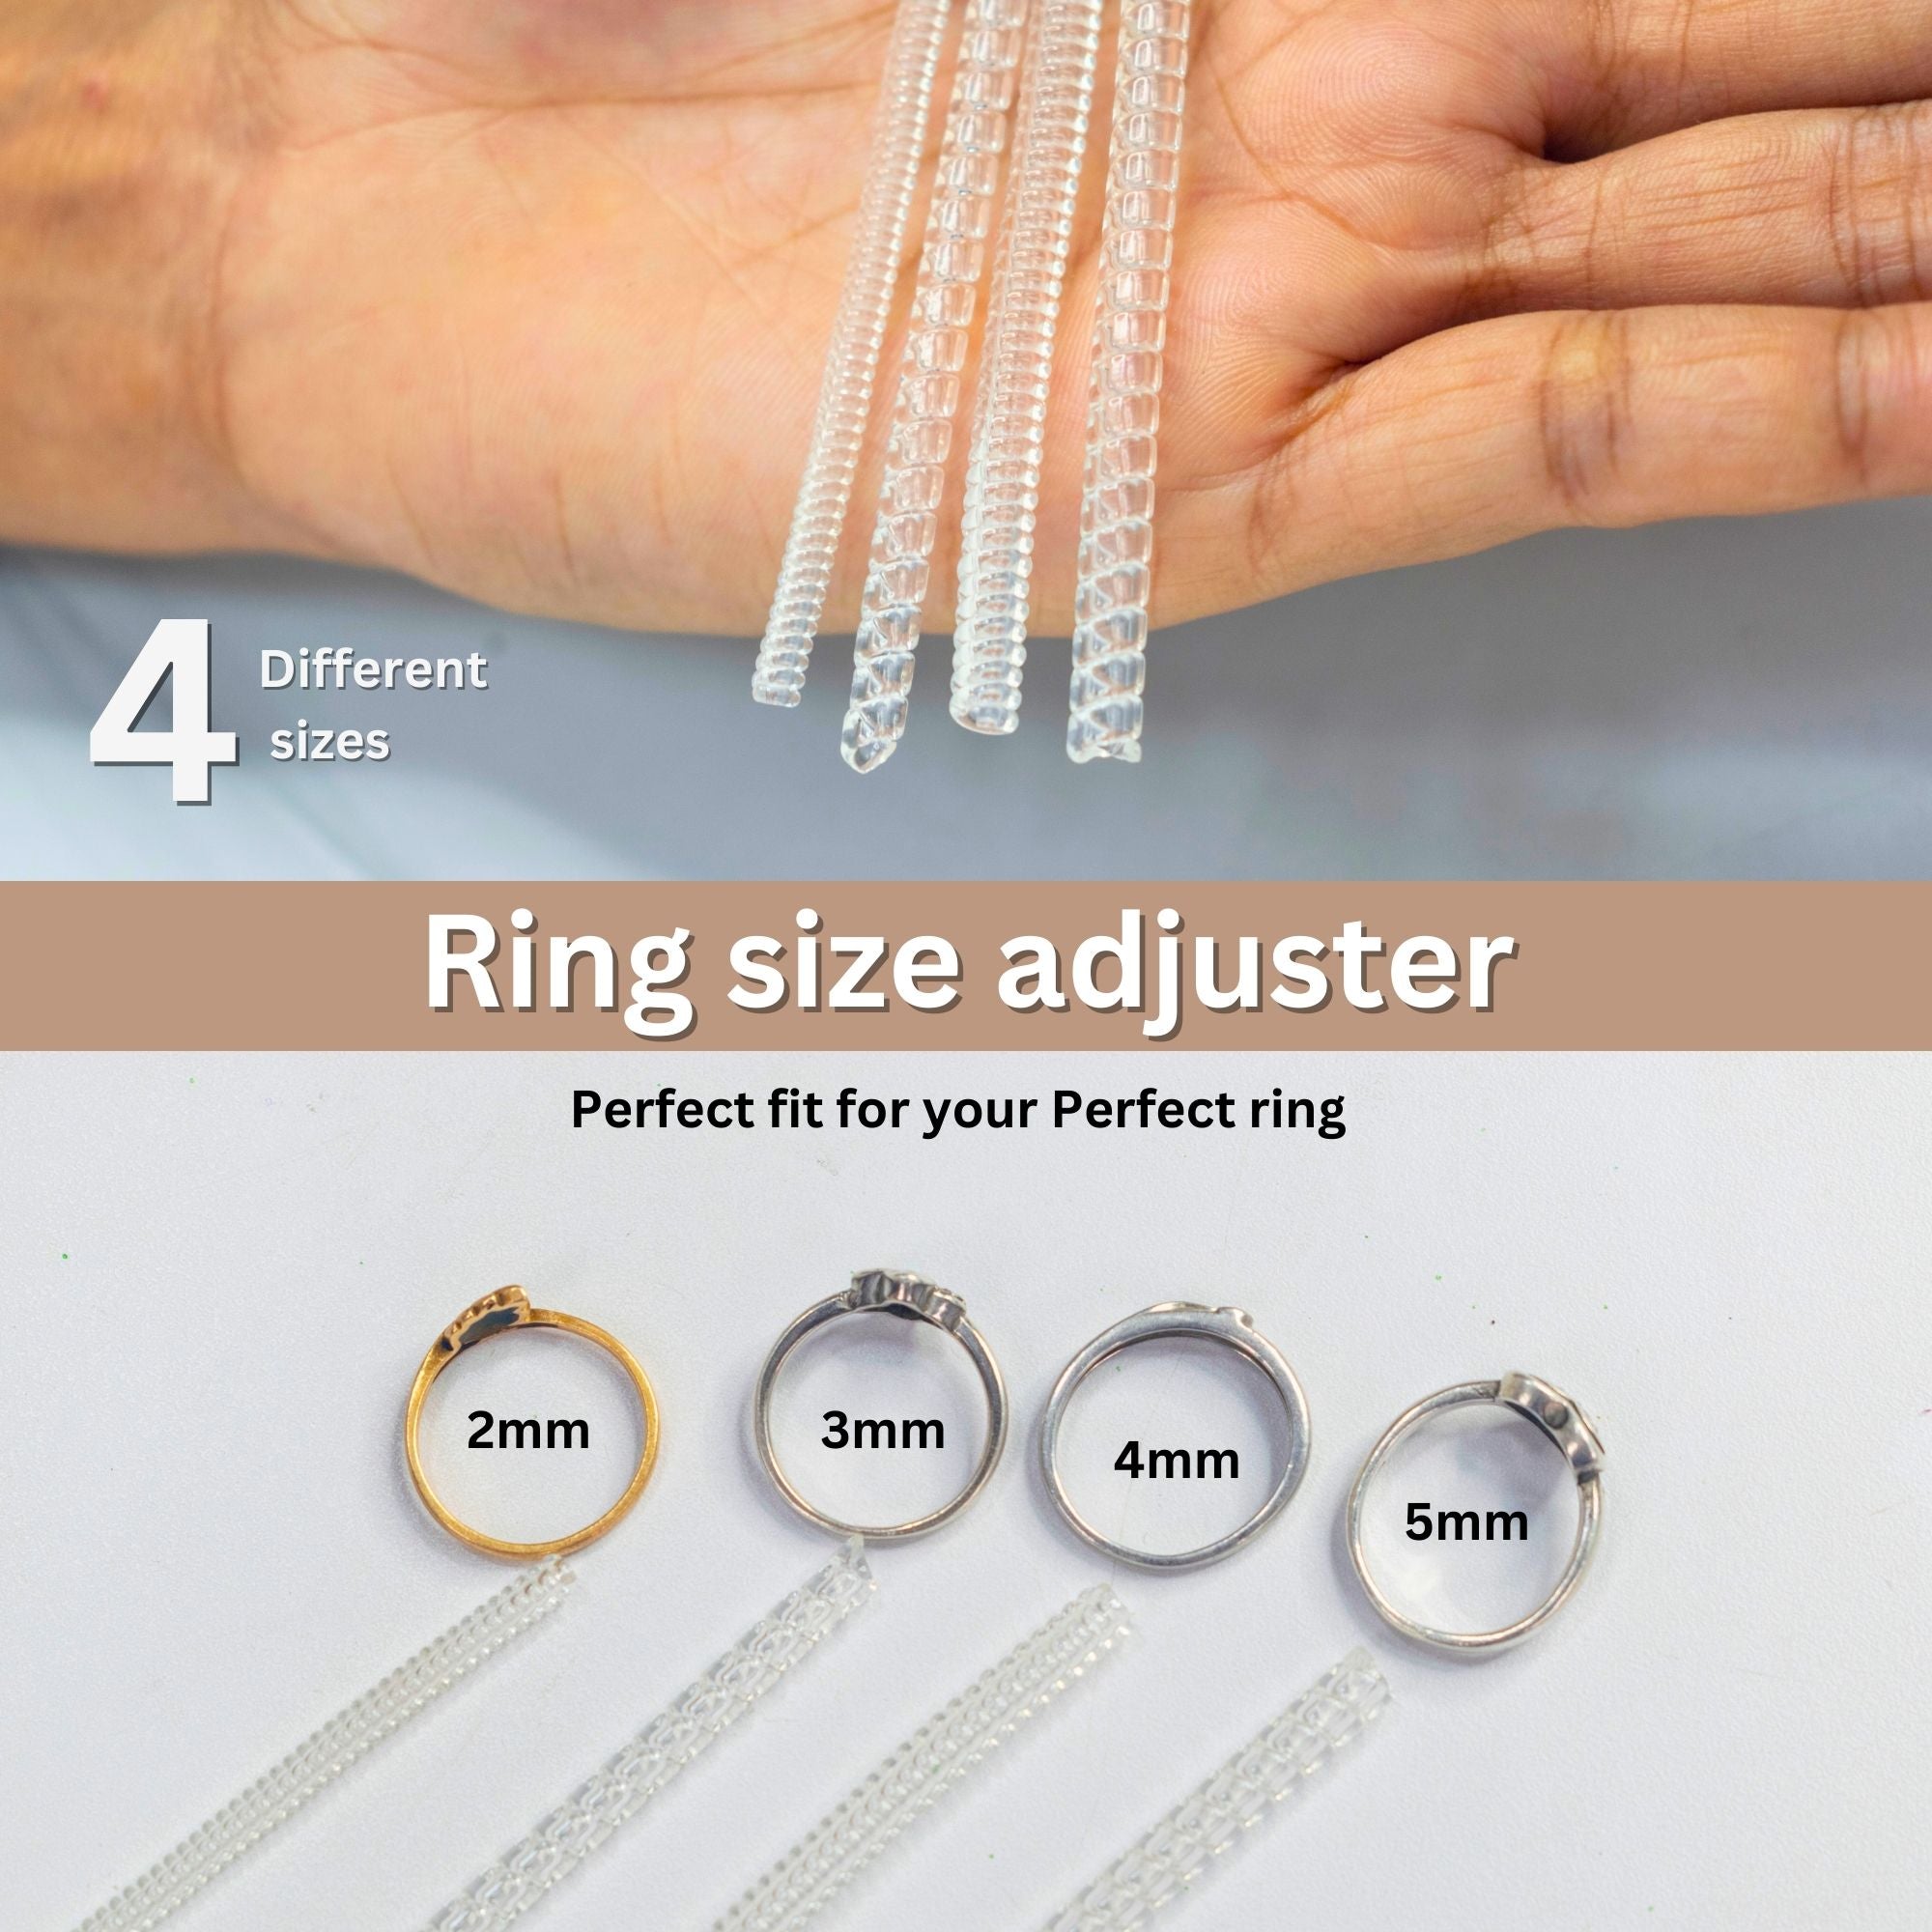 CrafTreat Silicone Ring Size Adjuster - 2mm to 5mm 4 Sizes 3Pcs Each